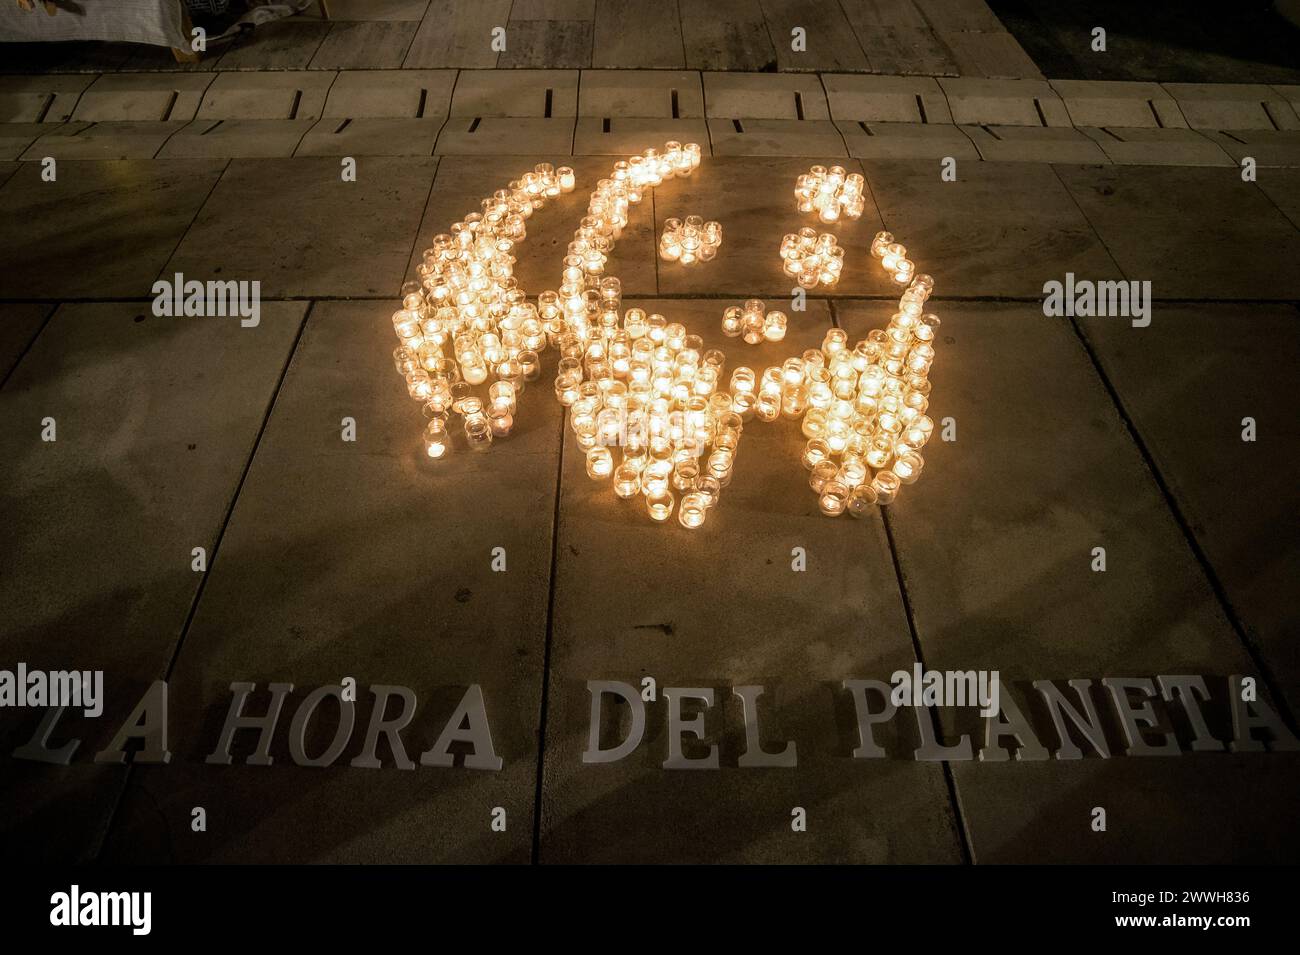 Malaga, Spain. 23rd Mar, 2024. A mosaic made with candles that depicts a panda, the symbol of WWF, is seen on the ground with slogan: 'La hora del planeta' (The hour of the earth) during the Earth Hour in the centre of Malaga. The figure made with candles is a panda, the symbol of the WWF. Thousands of cities worldwide switched off their electric lights during Earth Hour to highlight the dangers of climate change. Credit: SOPA Images Limited/Alamy Live News Stock Photo